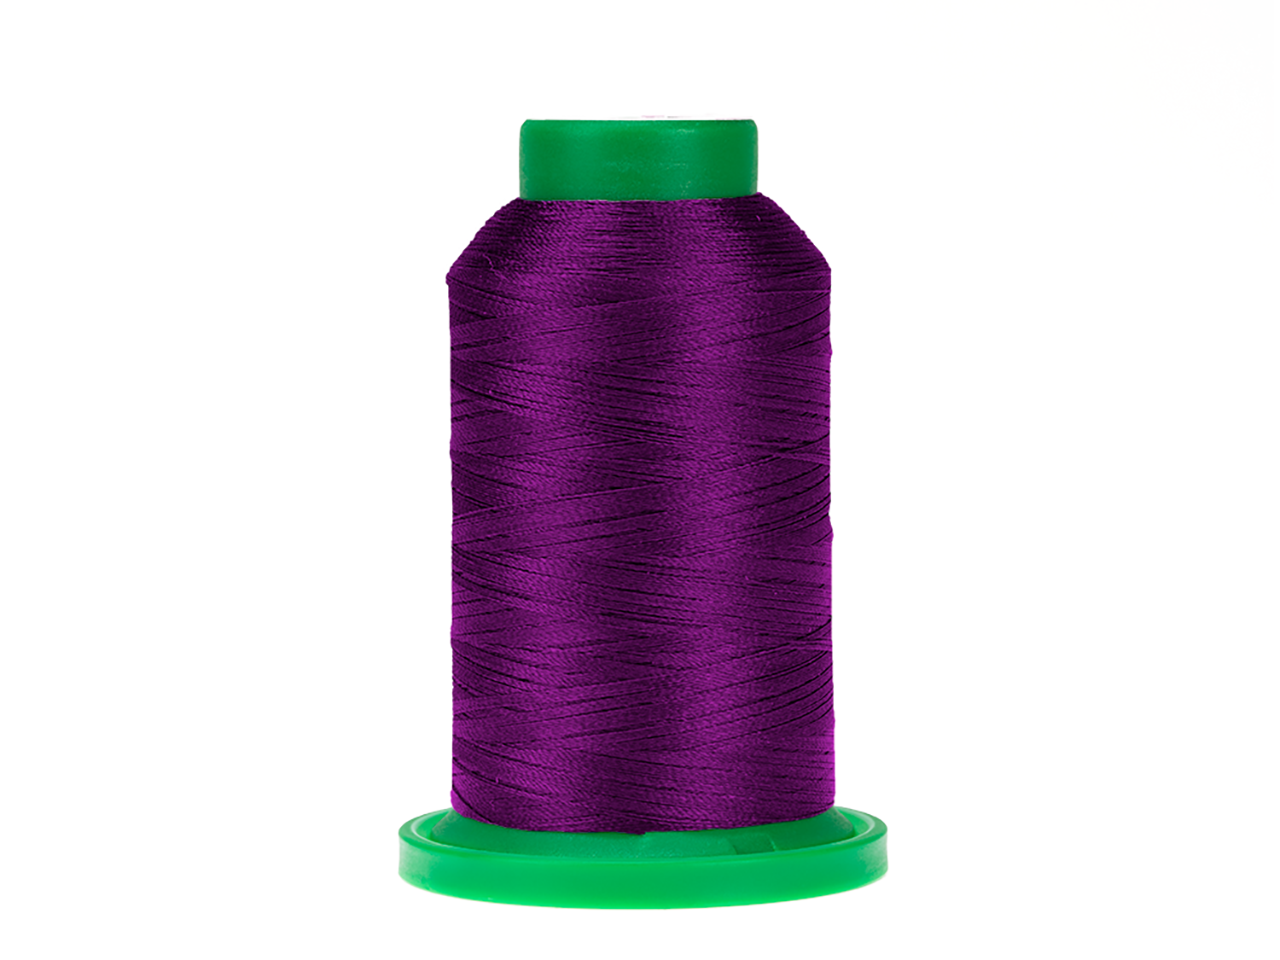 Isacord - A2704 - Purple Passion - 5000m